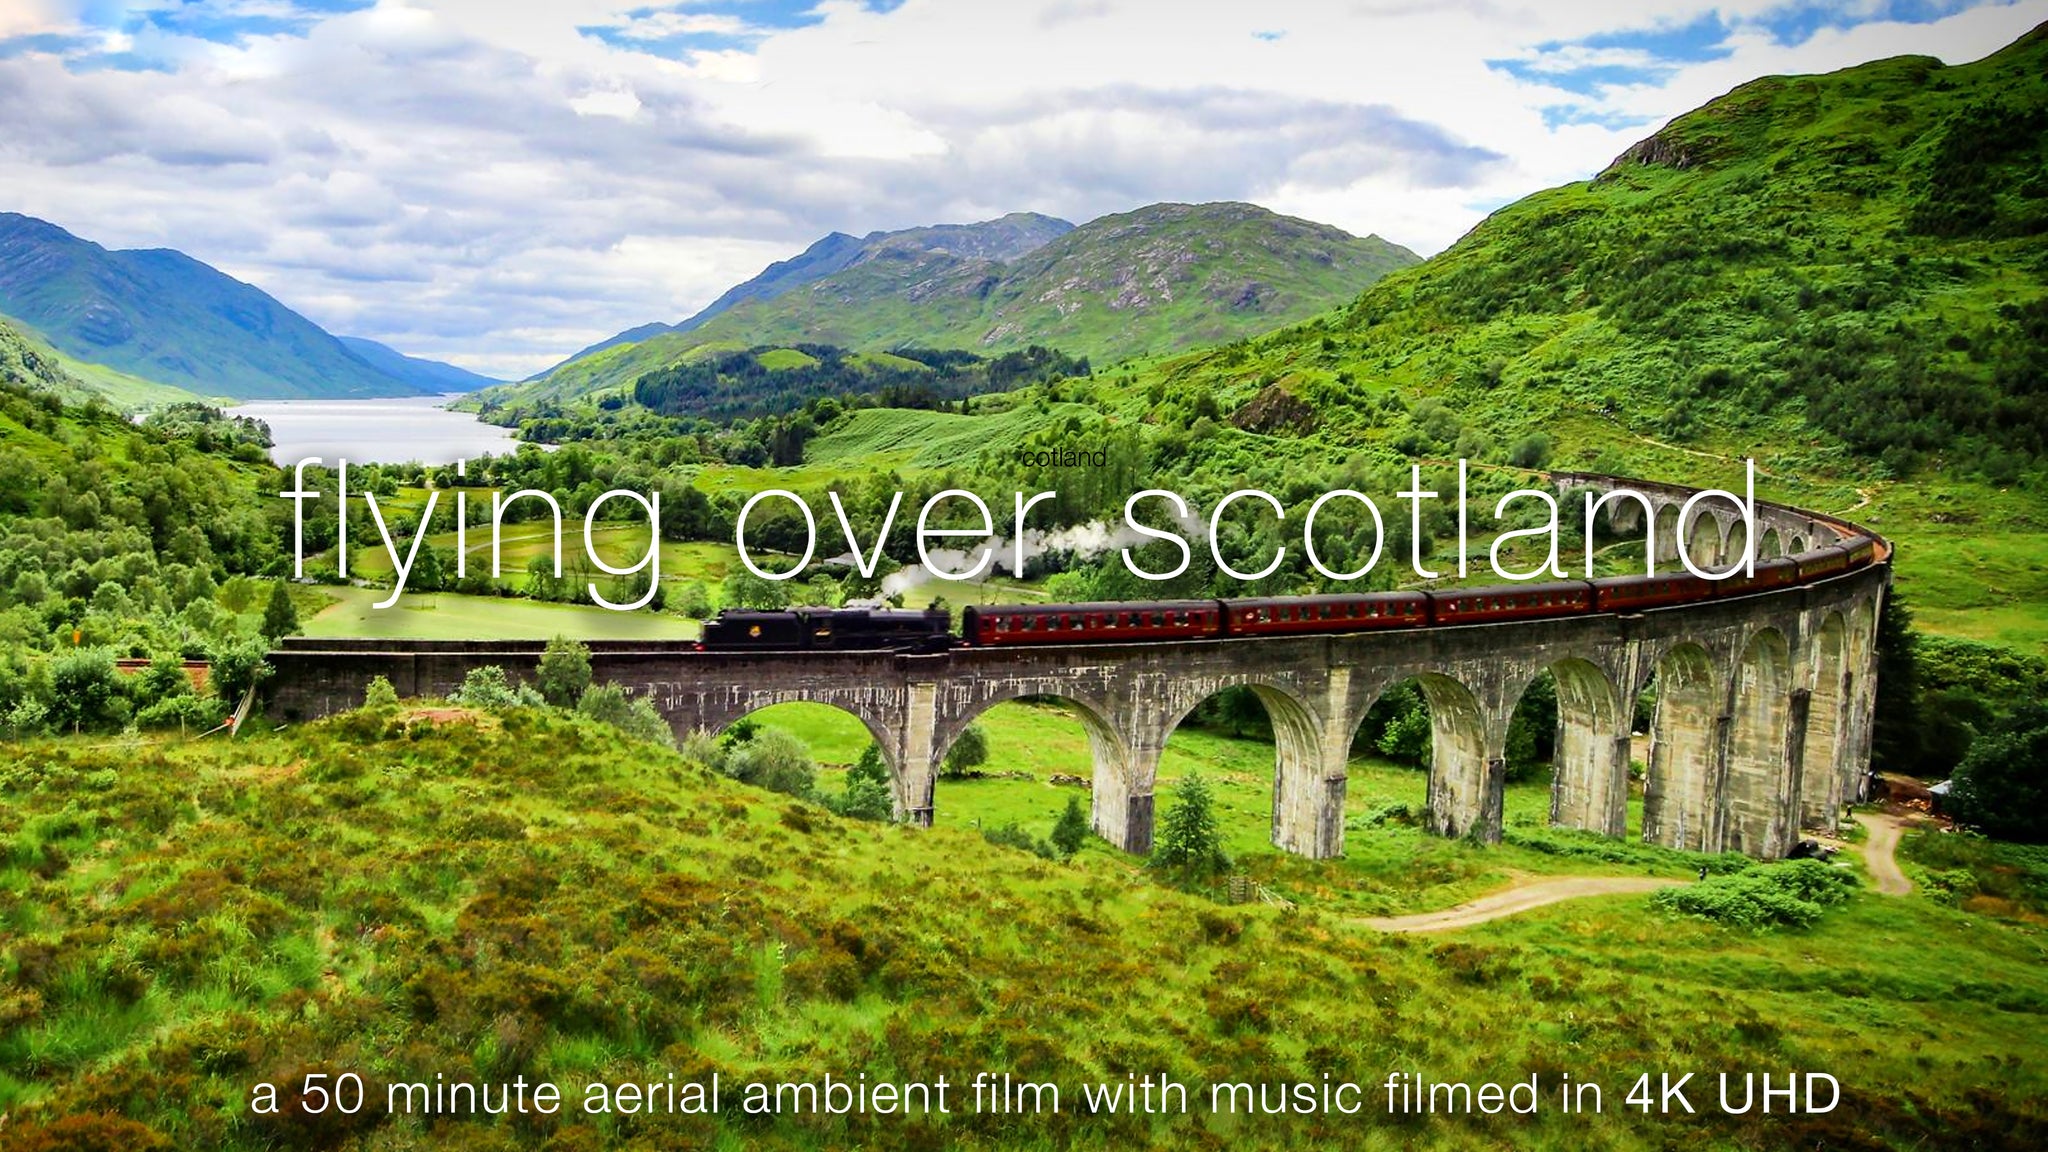 Flying Over Scotland" Highlands 1 HR Aerial 4K Film + Music – Nature Relaxation™ Films by Huting